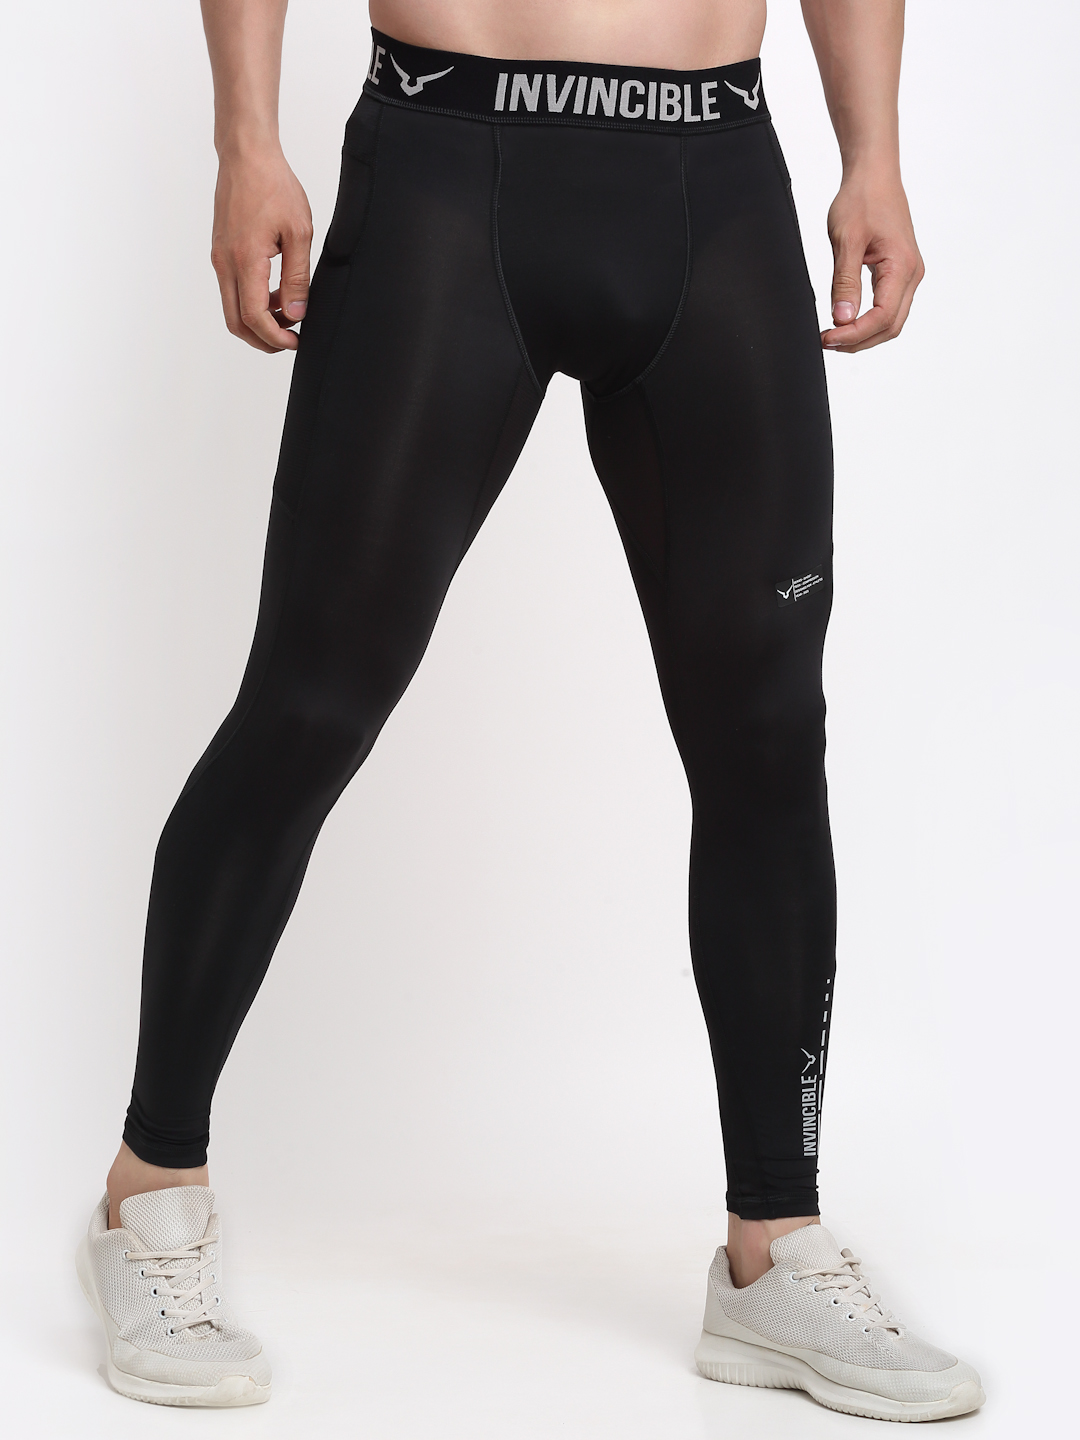 5 Benefits Of Compression Tights – Built for Athletes™